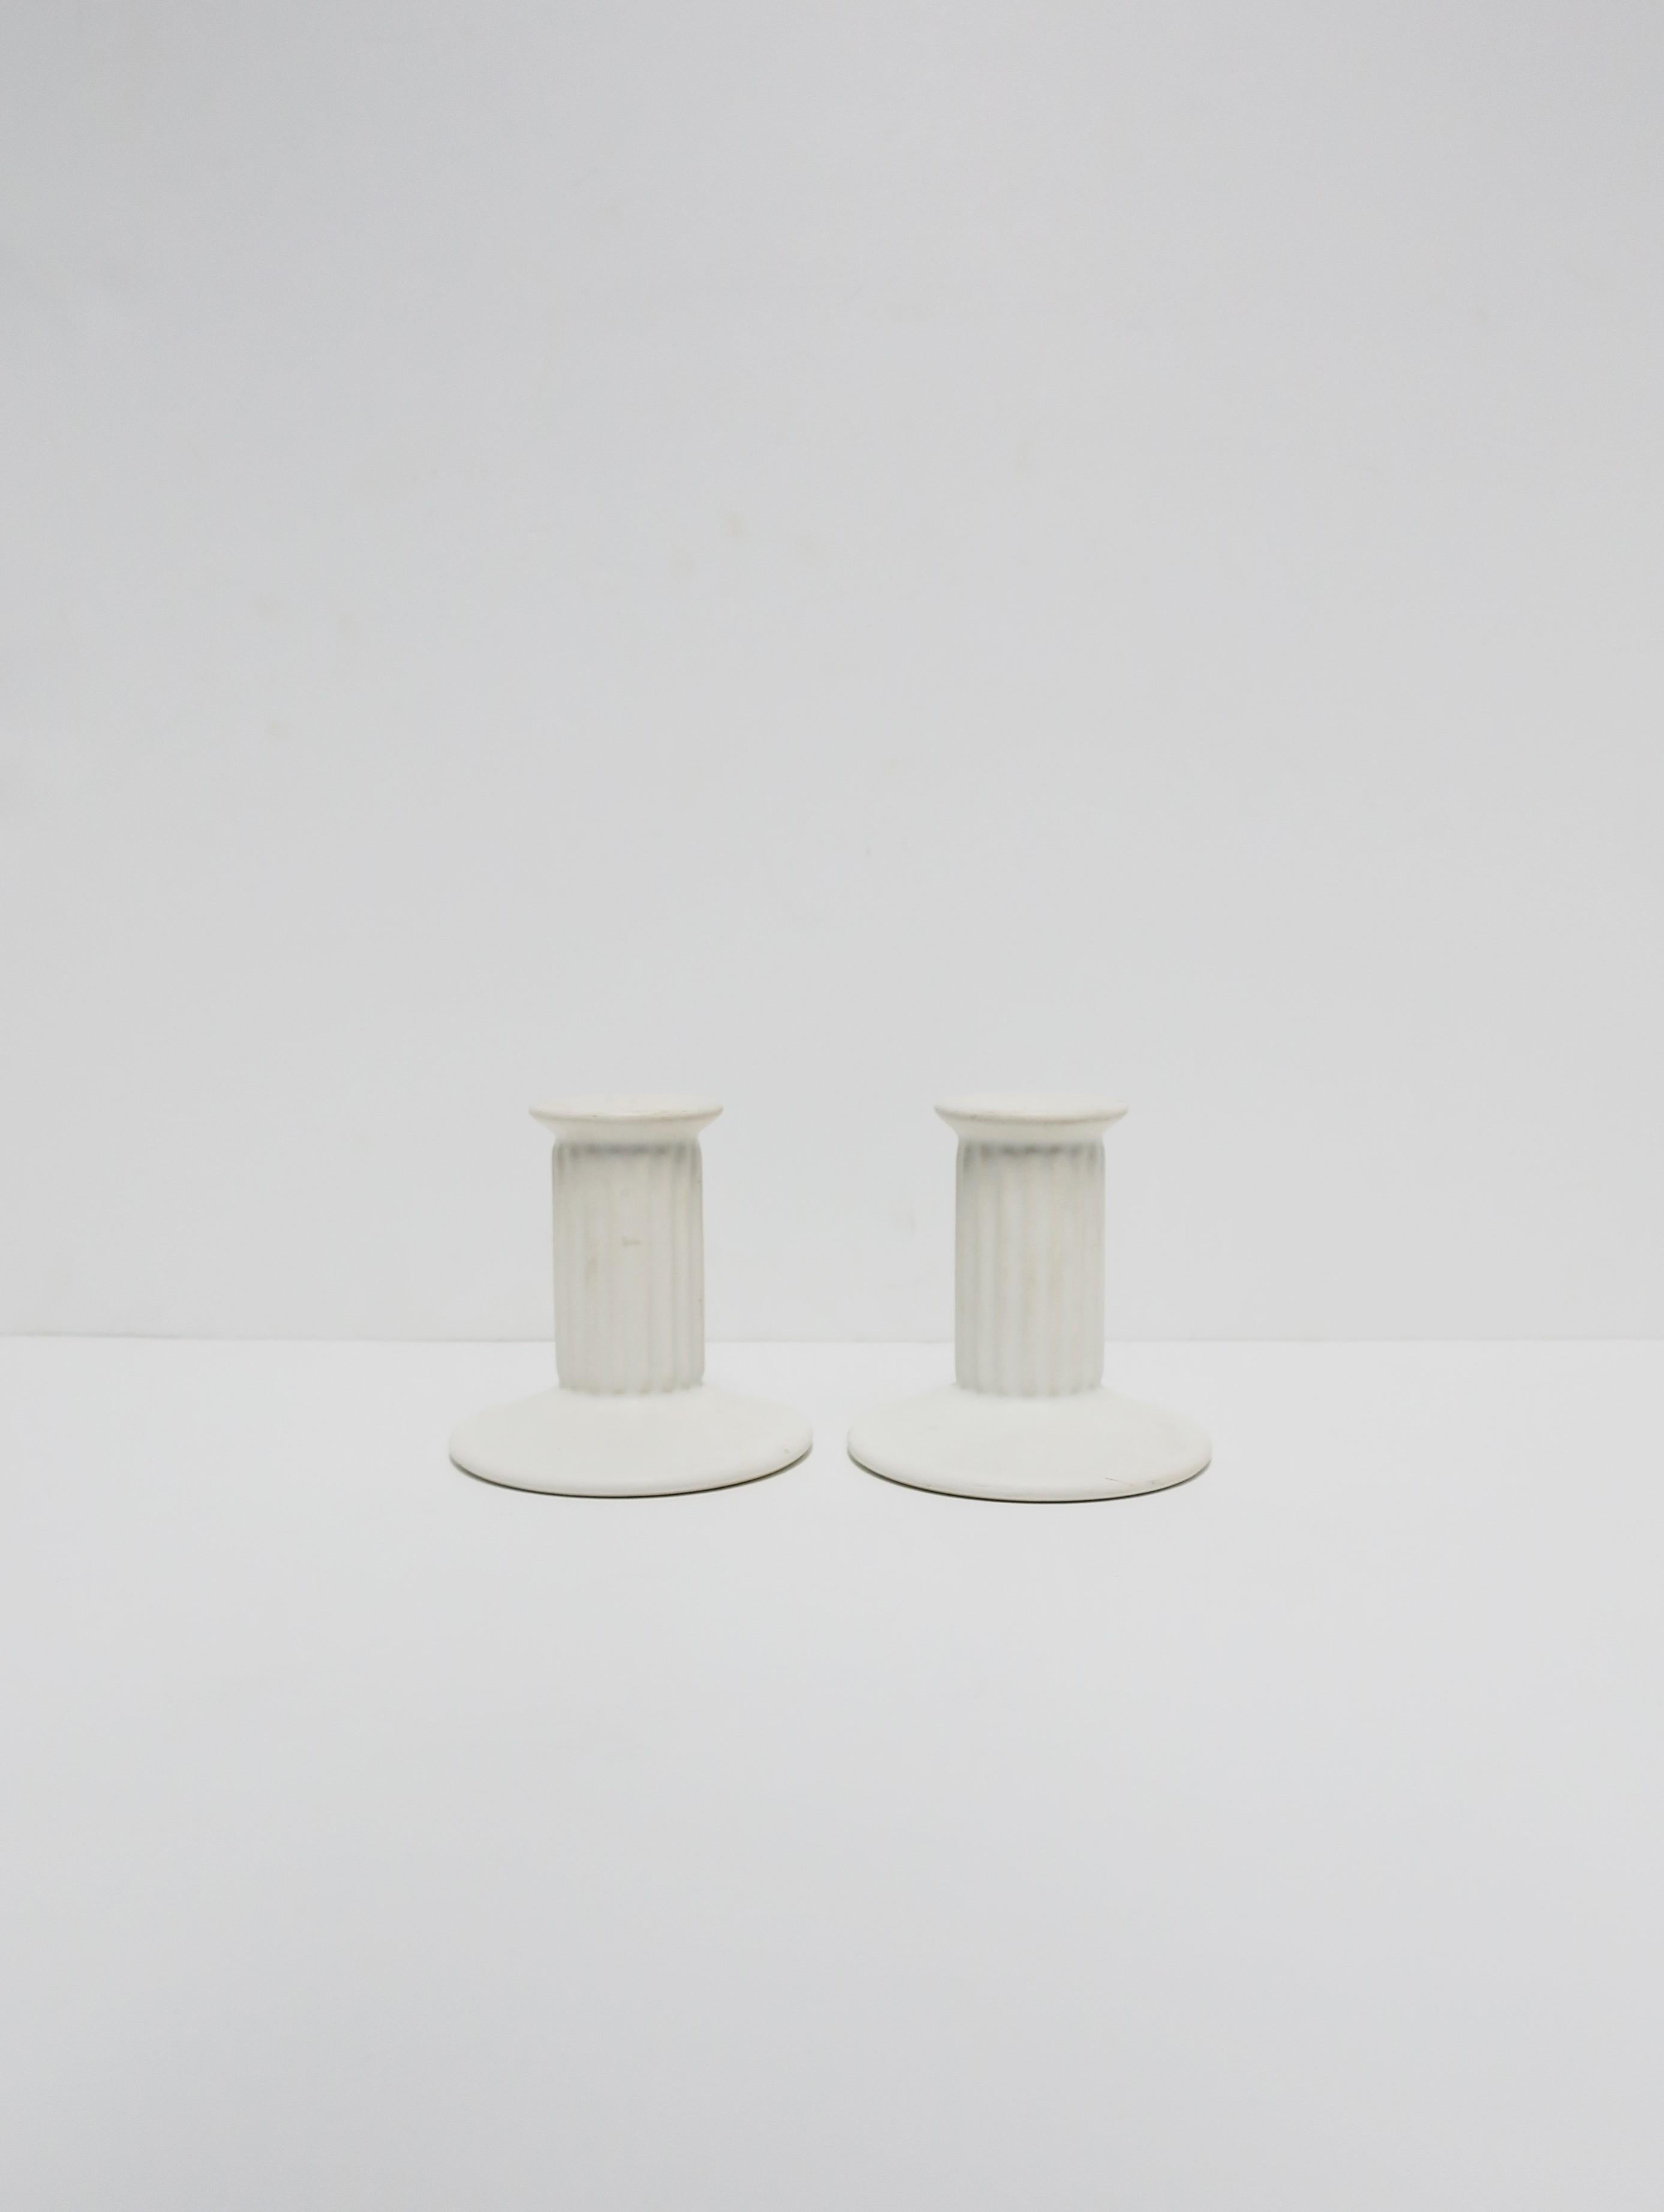 Neoclassical White Column Candlesticks Holders, Pair For Sale 4